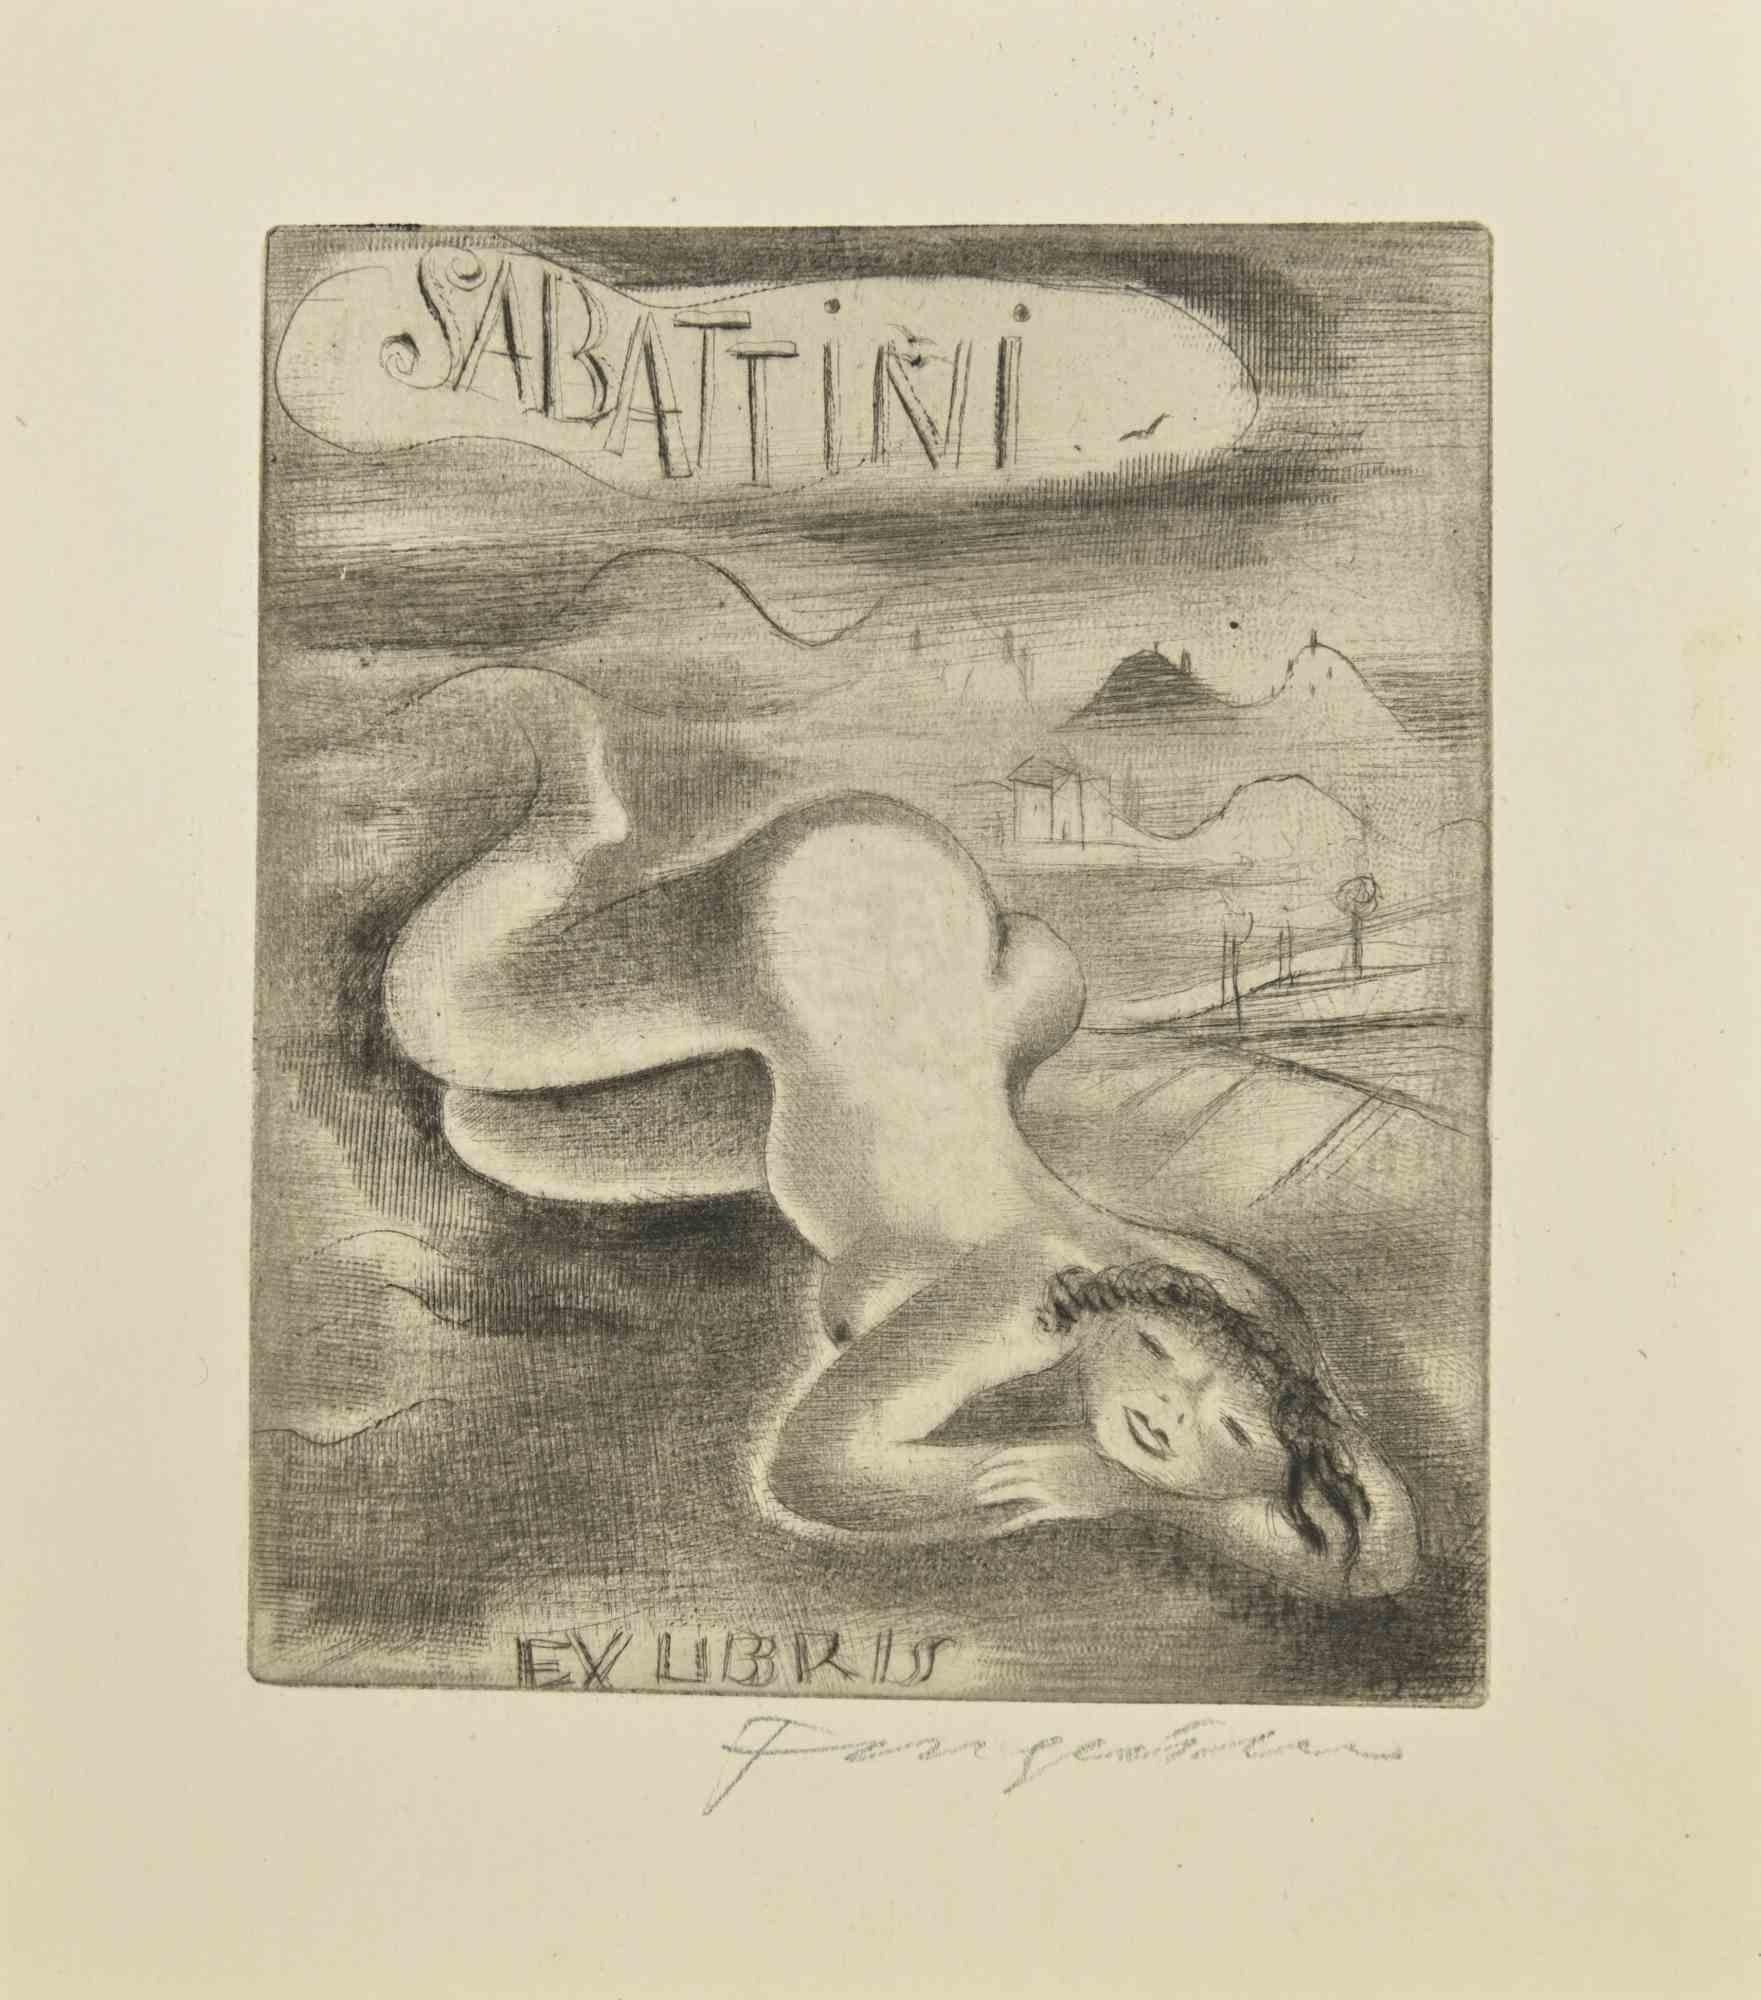 Ex Libris - Sabattini is an Etching print created by  Michel Fingesten.

Hand Signed on the lower right margin.

Very Good conditions.

Michel Fingesten (1884 - 1943) was a Czech painter and engraver of Jewish origin. He is considered one of the